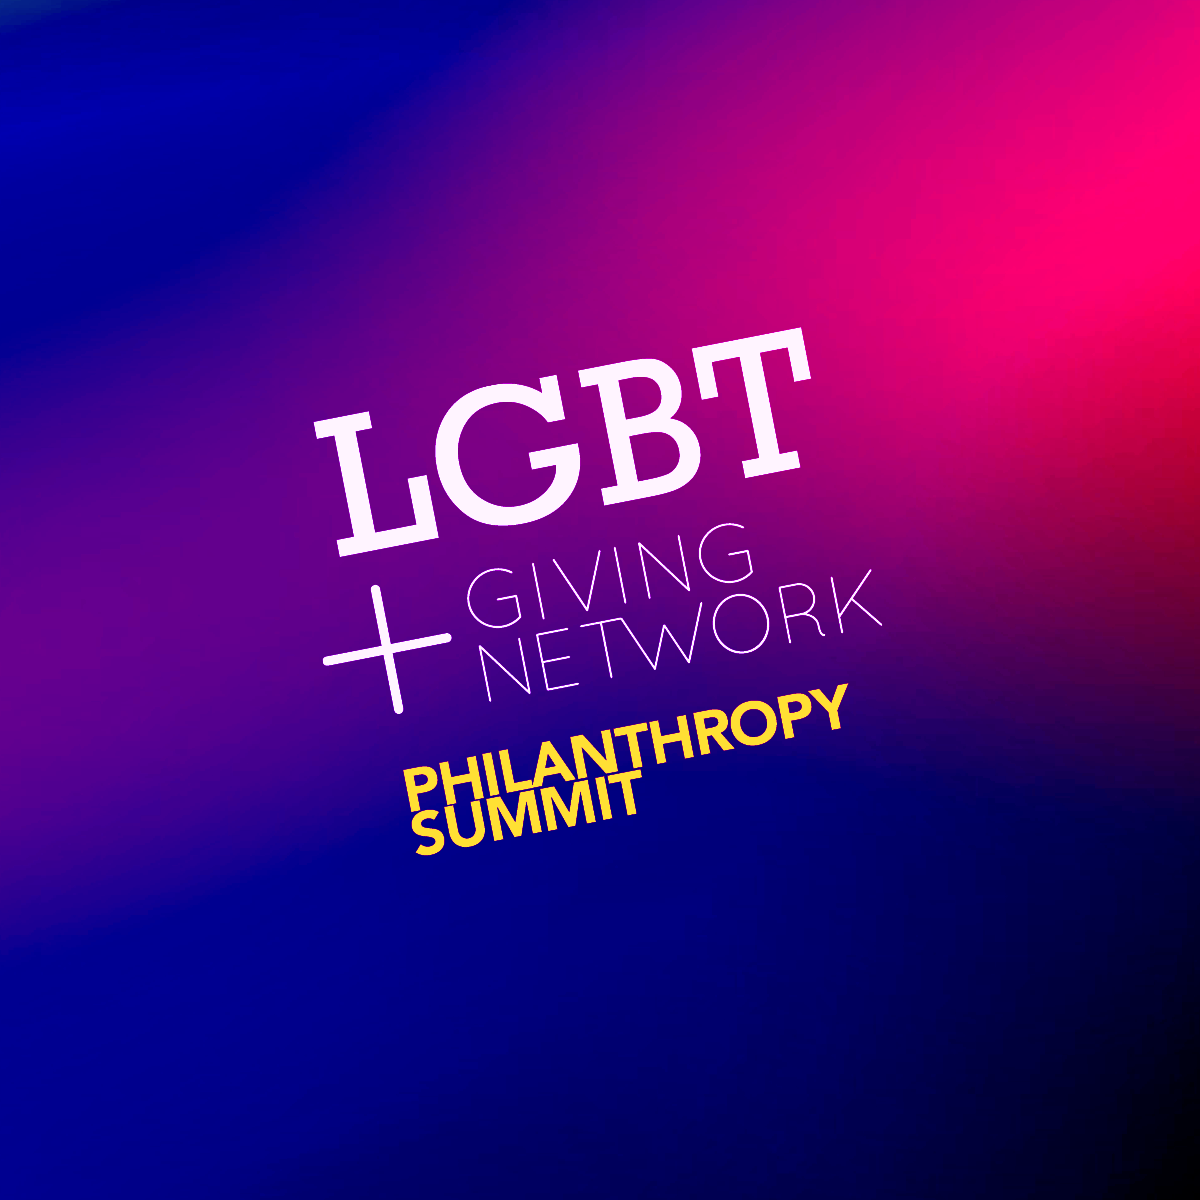 LGBT Giving Network